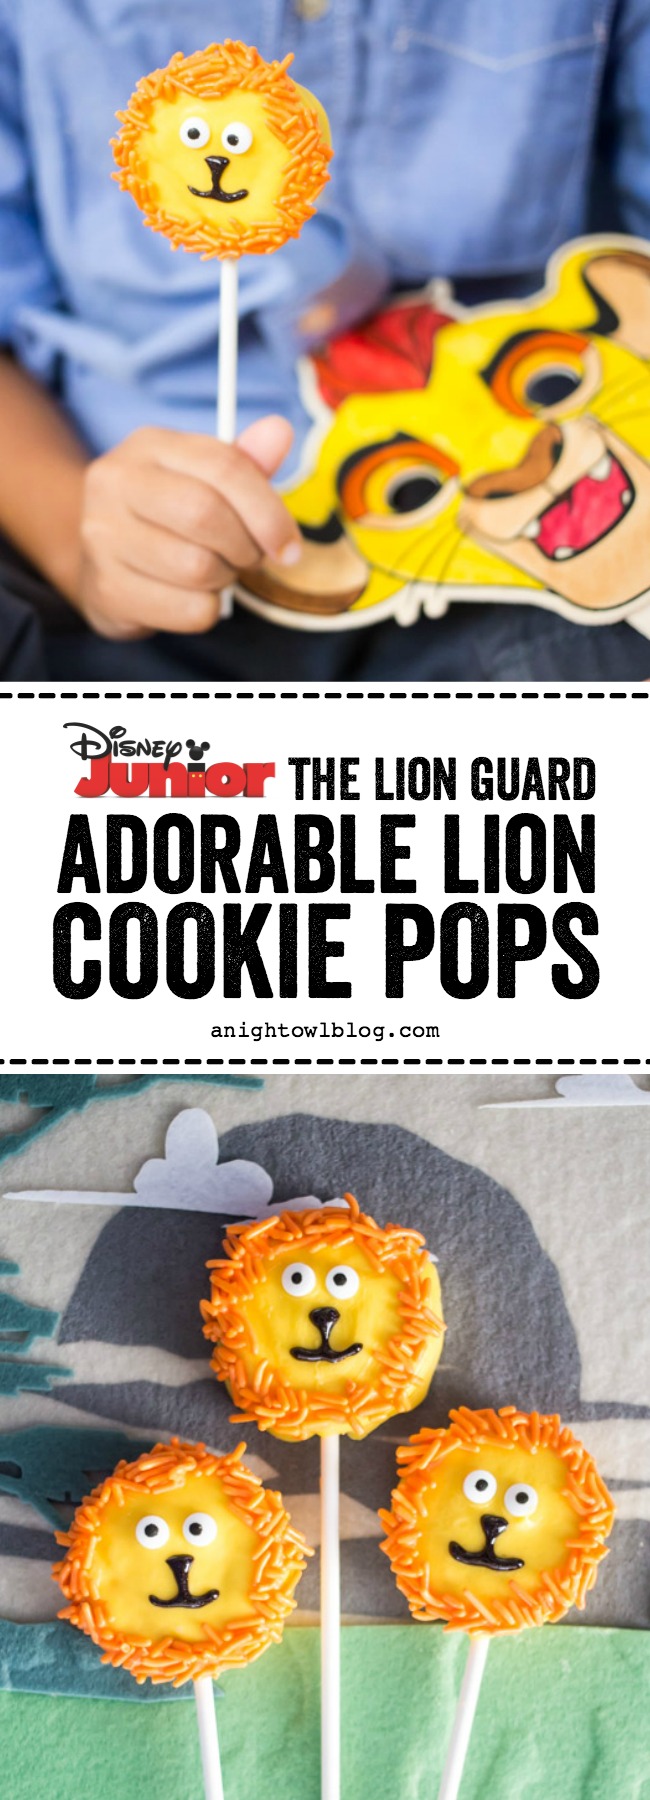 This summer put the YAY in your FriYAY with The Lion Guard on Disney Junior and these adorable Lion Cookie Pops for your kiddos!